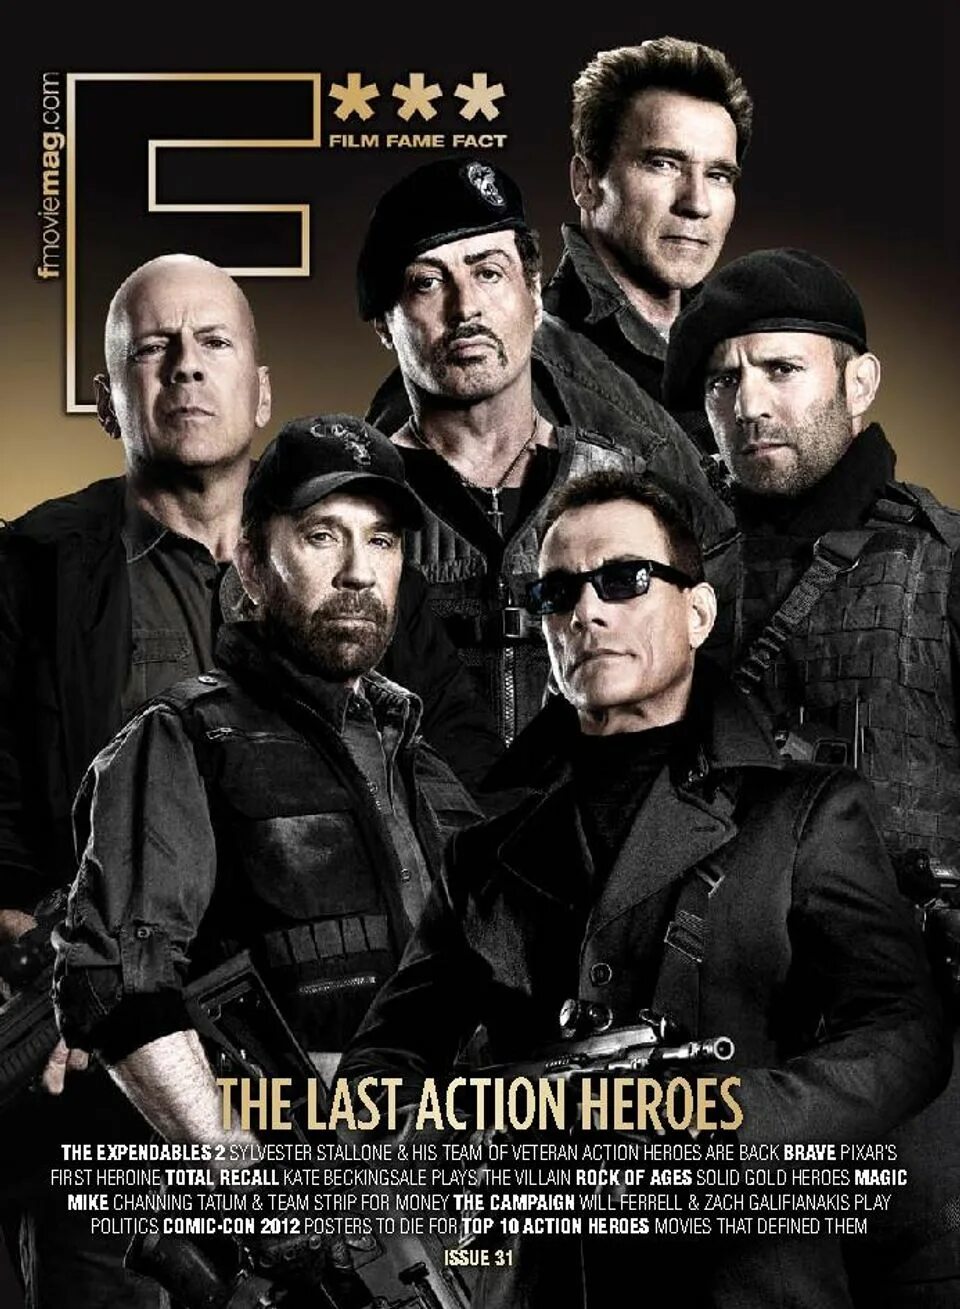 Issue f. Jean Claude van Damme Expendables 2. Chuck Norris in Неудержимые 2 the Expendables 2, 2012. The Expendables. Ли Кристмас Неудержимые.